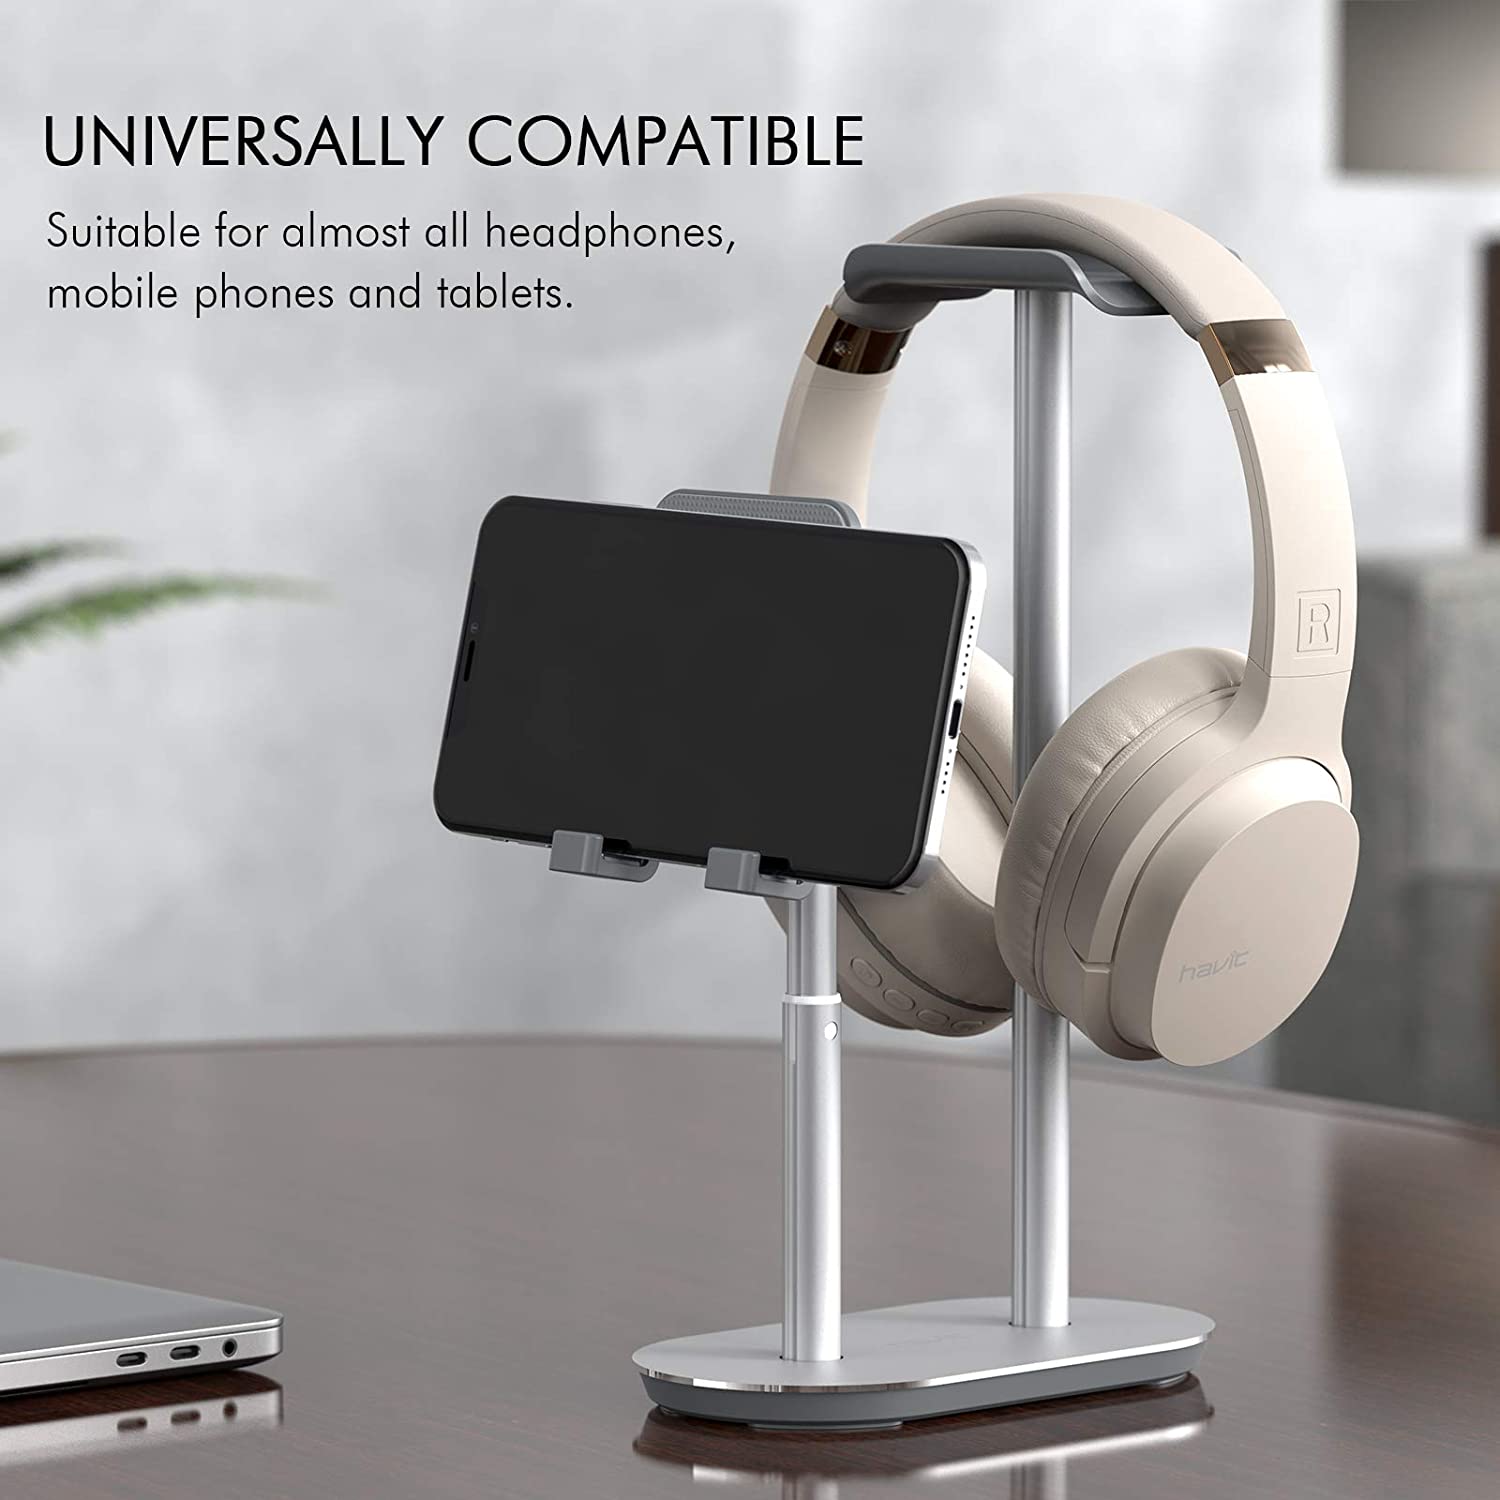 HAVIT TH660 Headset and Phone Stand for Phones Tablets PC Gamer Desktop